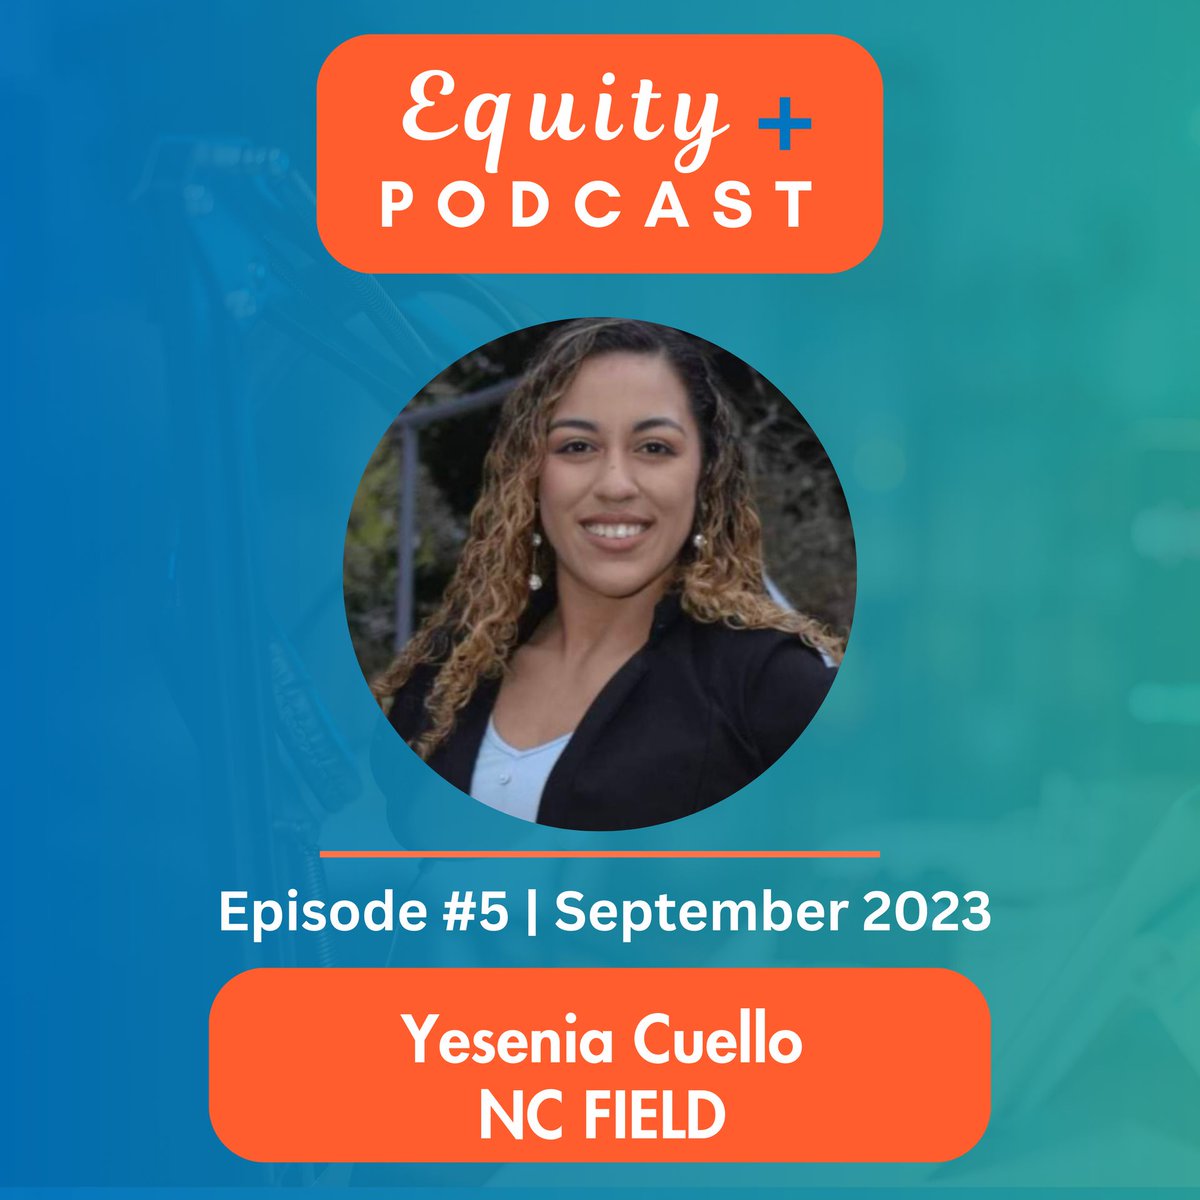 It's National Farmworker Awareness Week! You can learn more about farmworkers in NC from our episode #5 of the Equity+ Podcast featuring Yesenia Cuello, Executive Director of @nc_field: equity-podcast.simplecast.com/episodes/episo…
#nationalfarmworkerawarenessweek #farmworkerjustice #healthequity